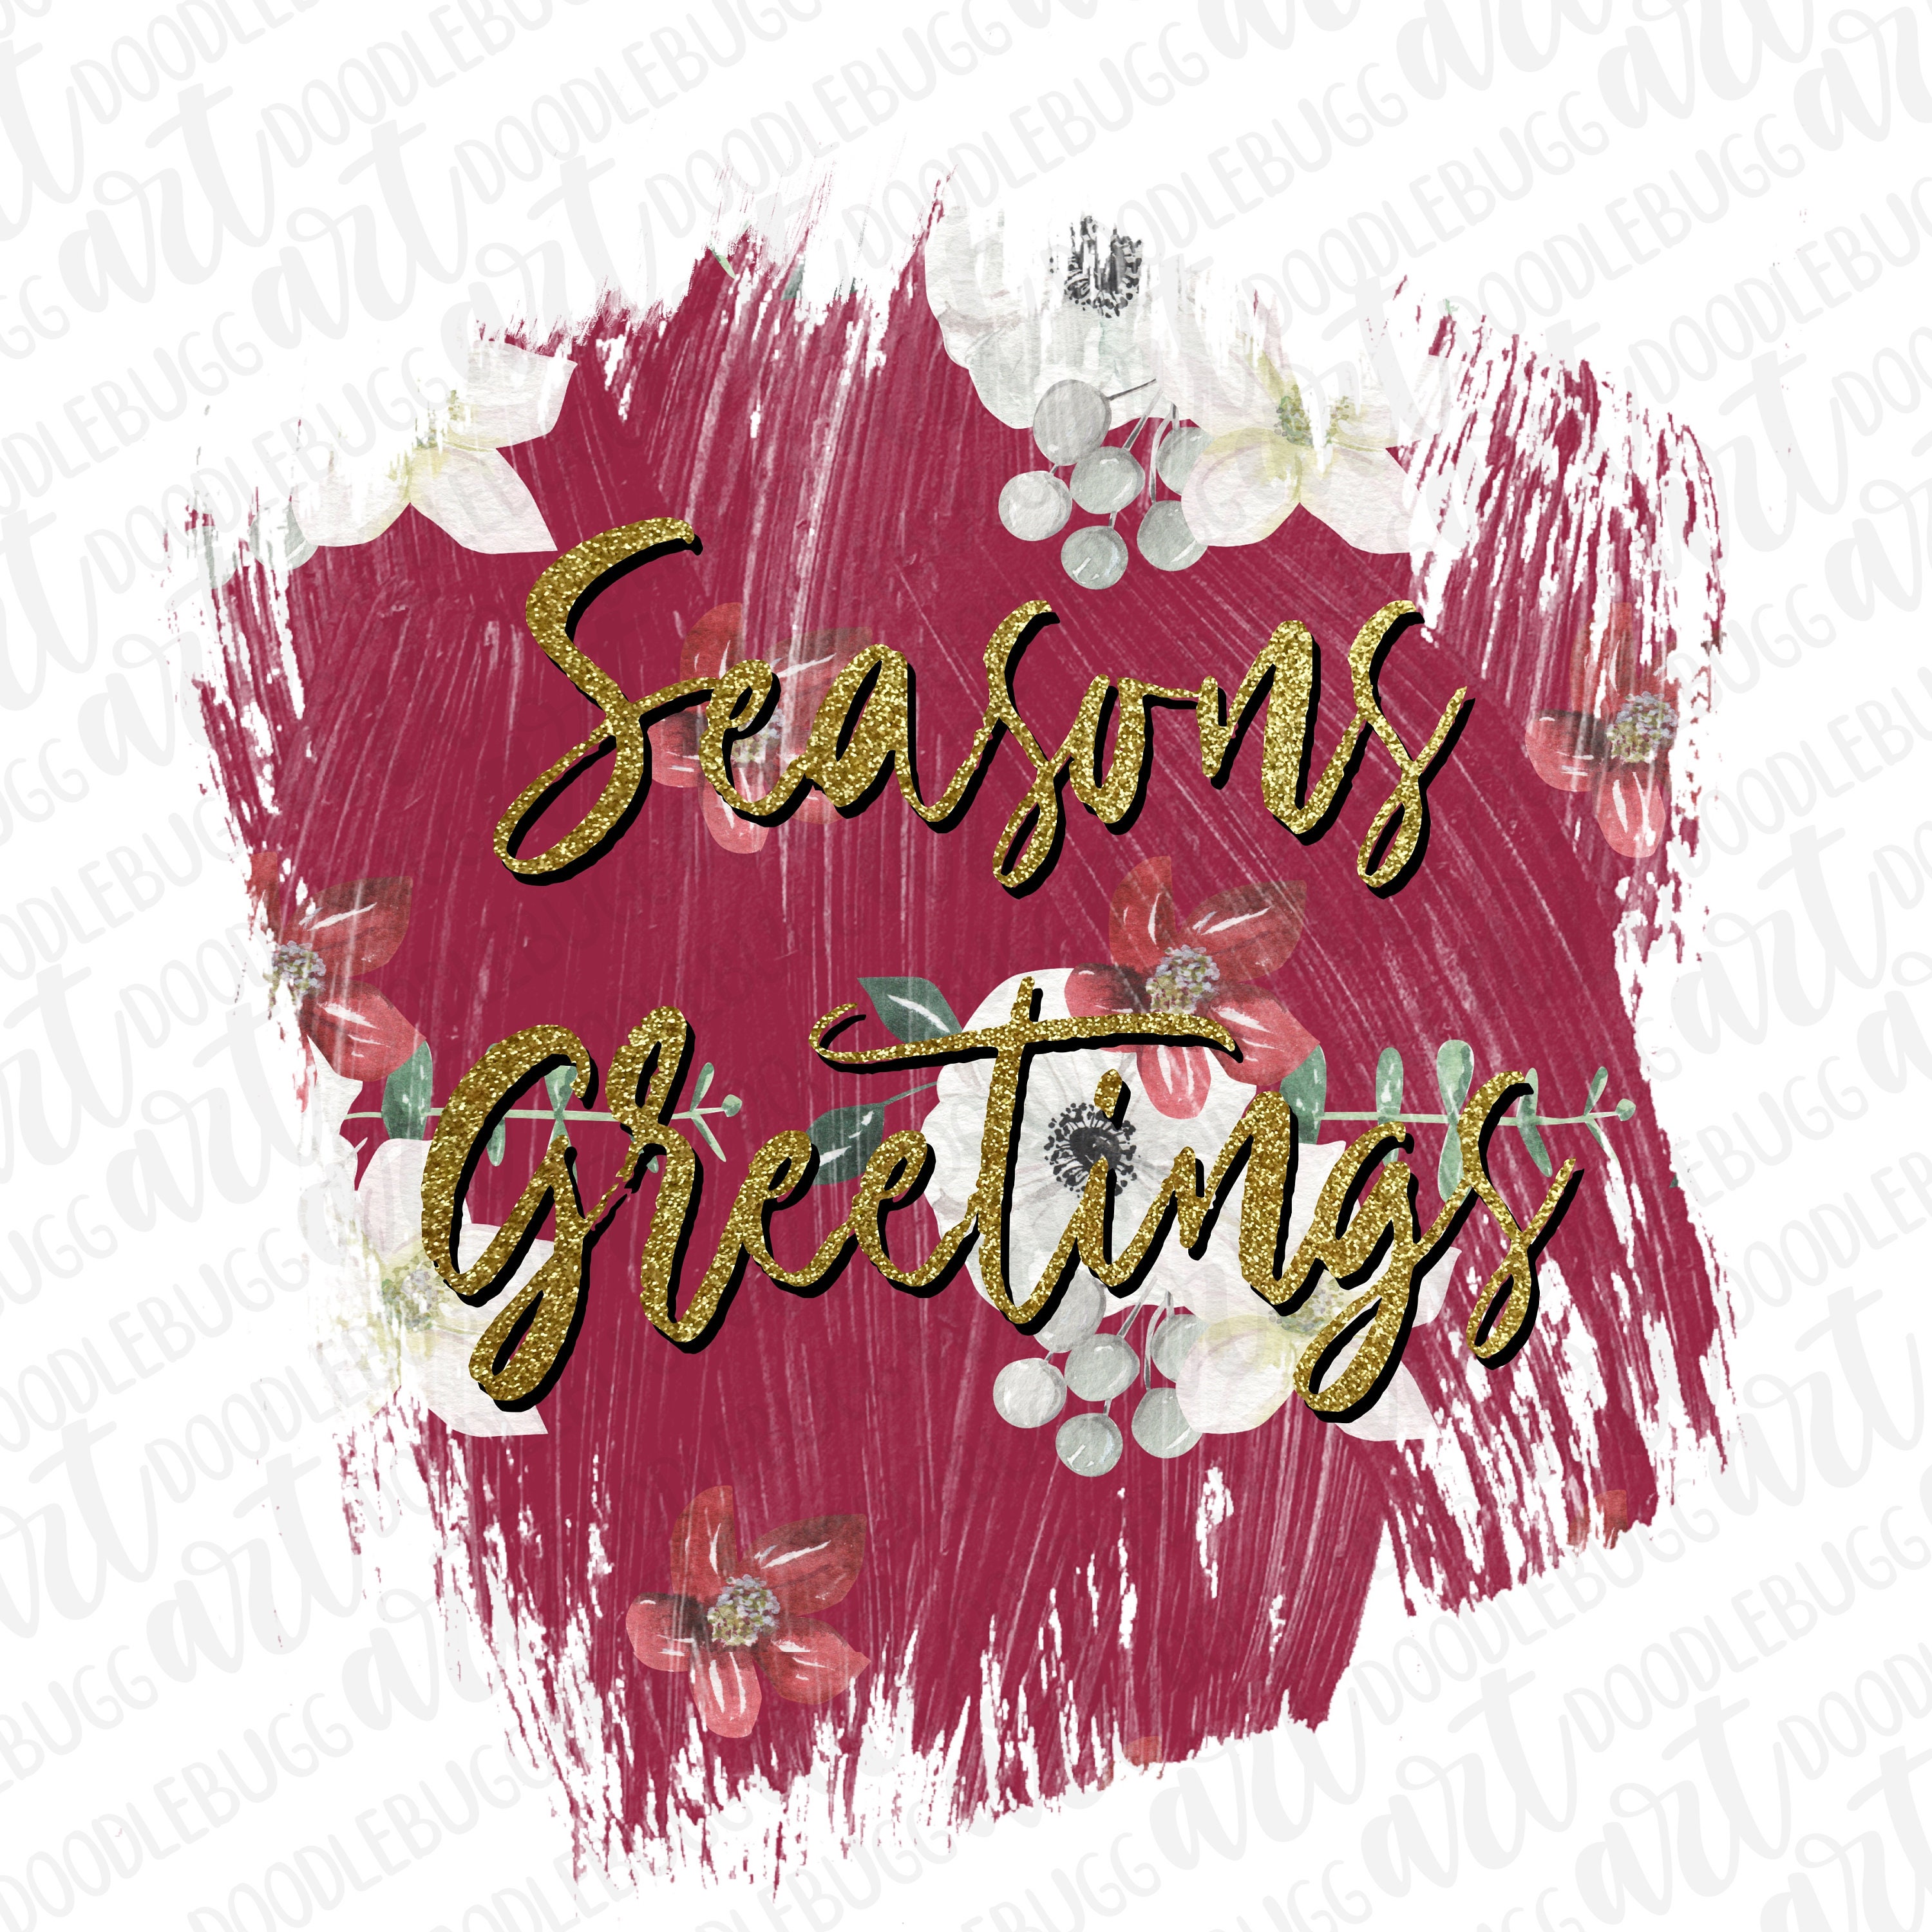 Seasons Greetings Cast Iron Skillet Png for Round Cutting Board Template  Christmas Farmhouse Sublimation Designs Templates Xmas Png 